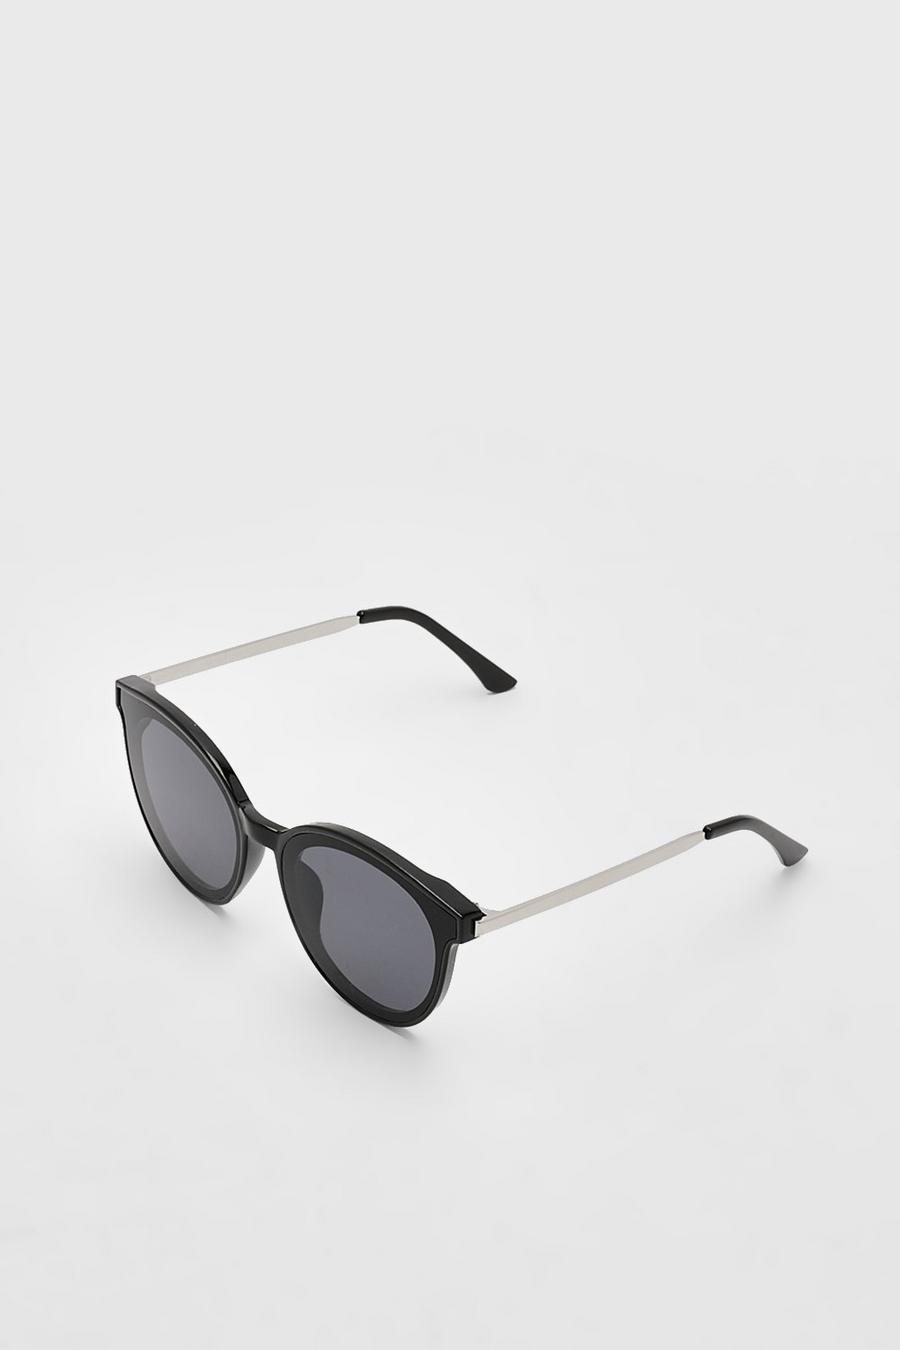 Rounded Oval Black Sunglasses 